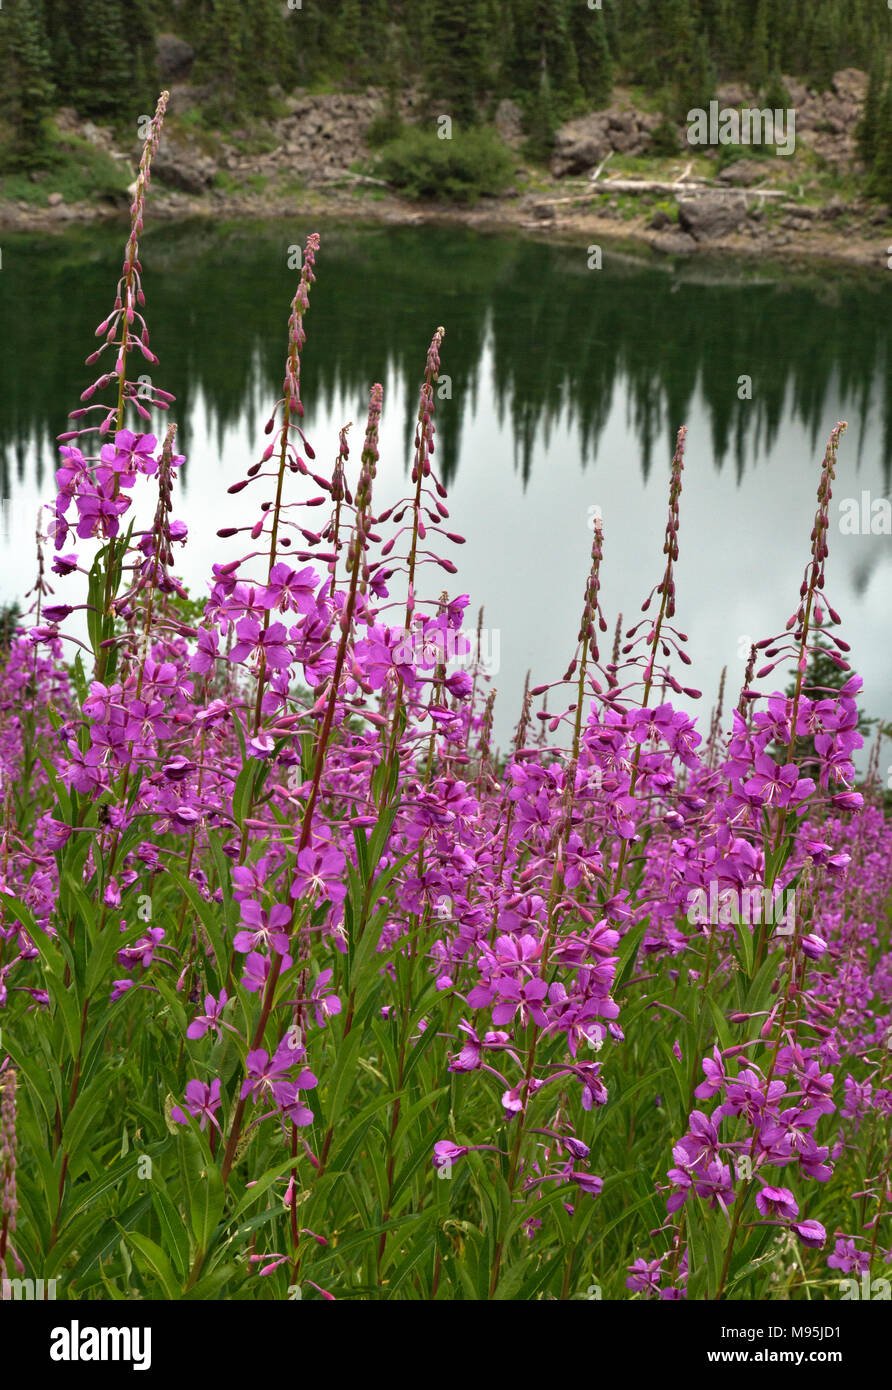 WA13896-00...WASHINGTON - Hill covered with colorful fireweed above Home Lake in the Dungeness River Valley area of Olympic National Park. Stock Photo